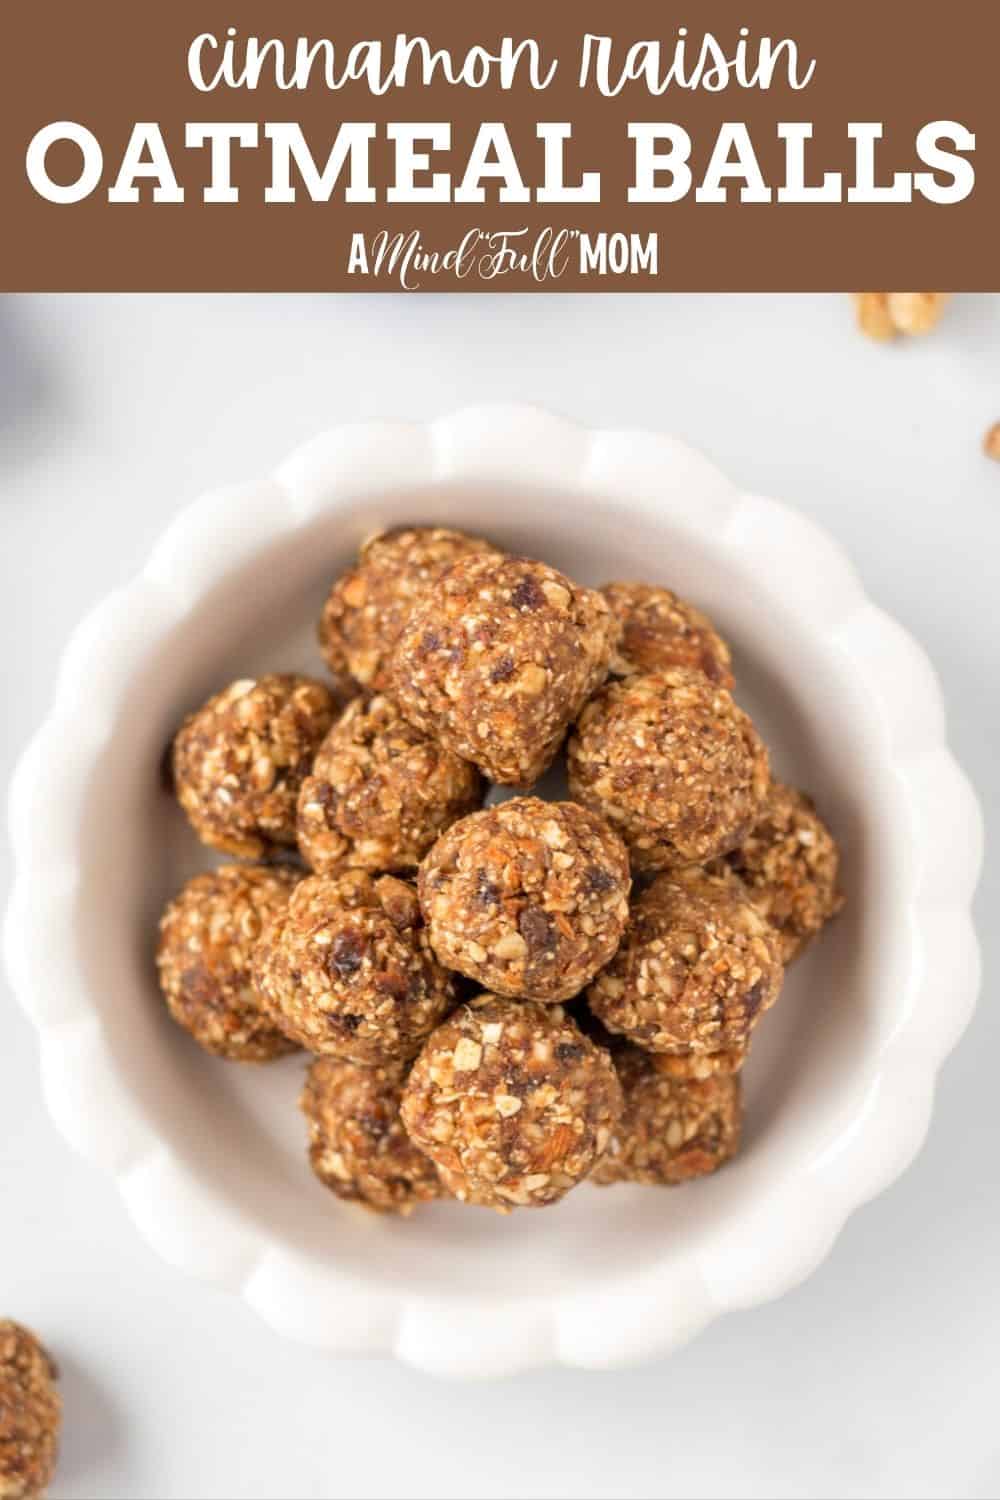 These No-Bake Oatmeal Balls are an easy, healthy, gluten-free treat made with oats, raisins, dates, cinnamon, and nuts.